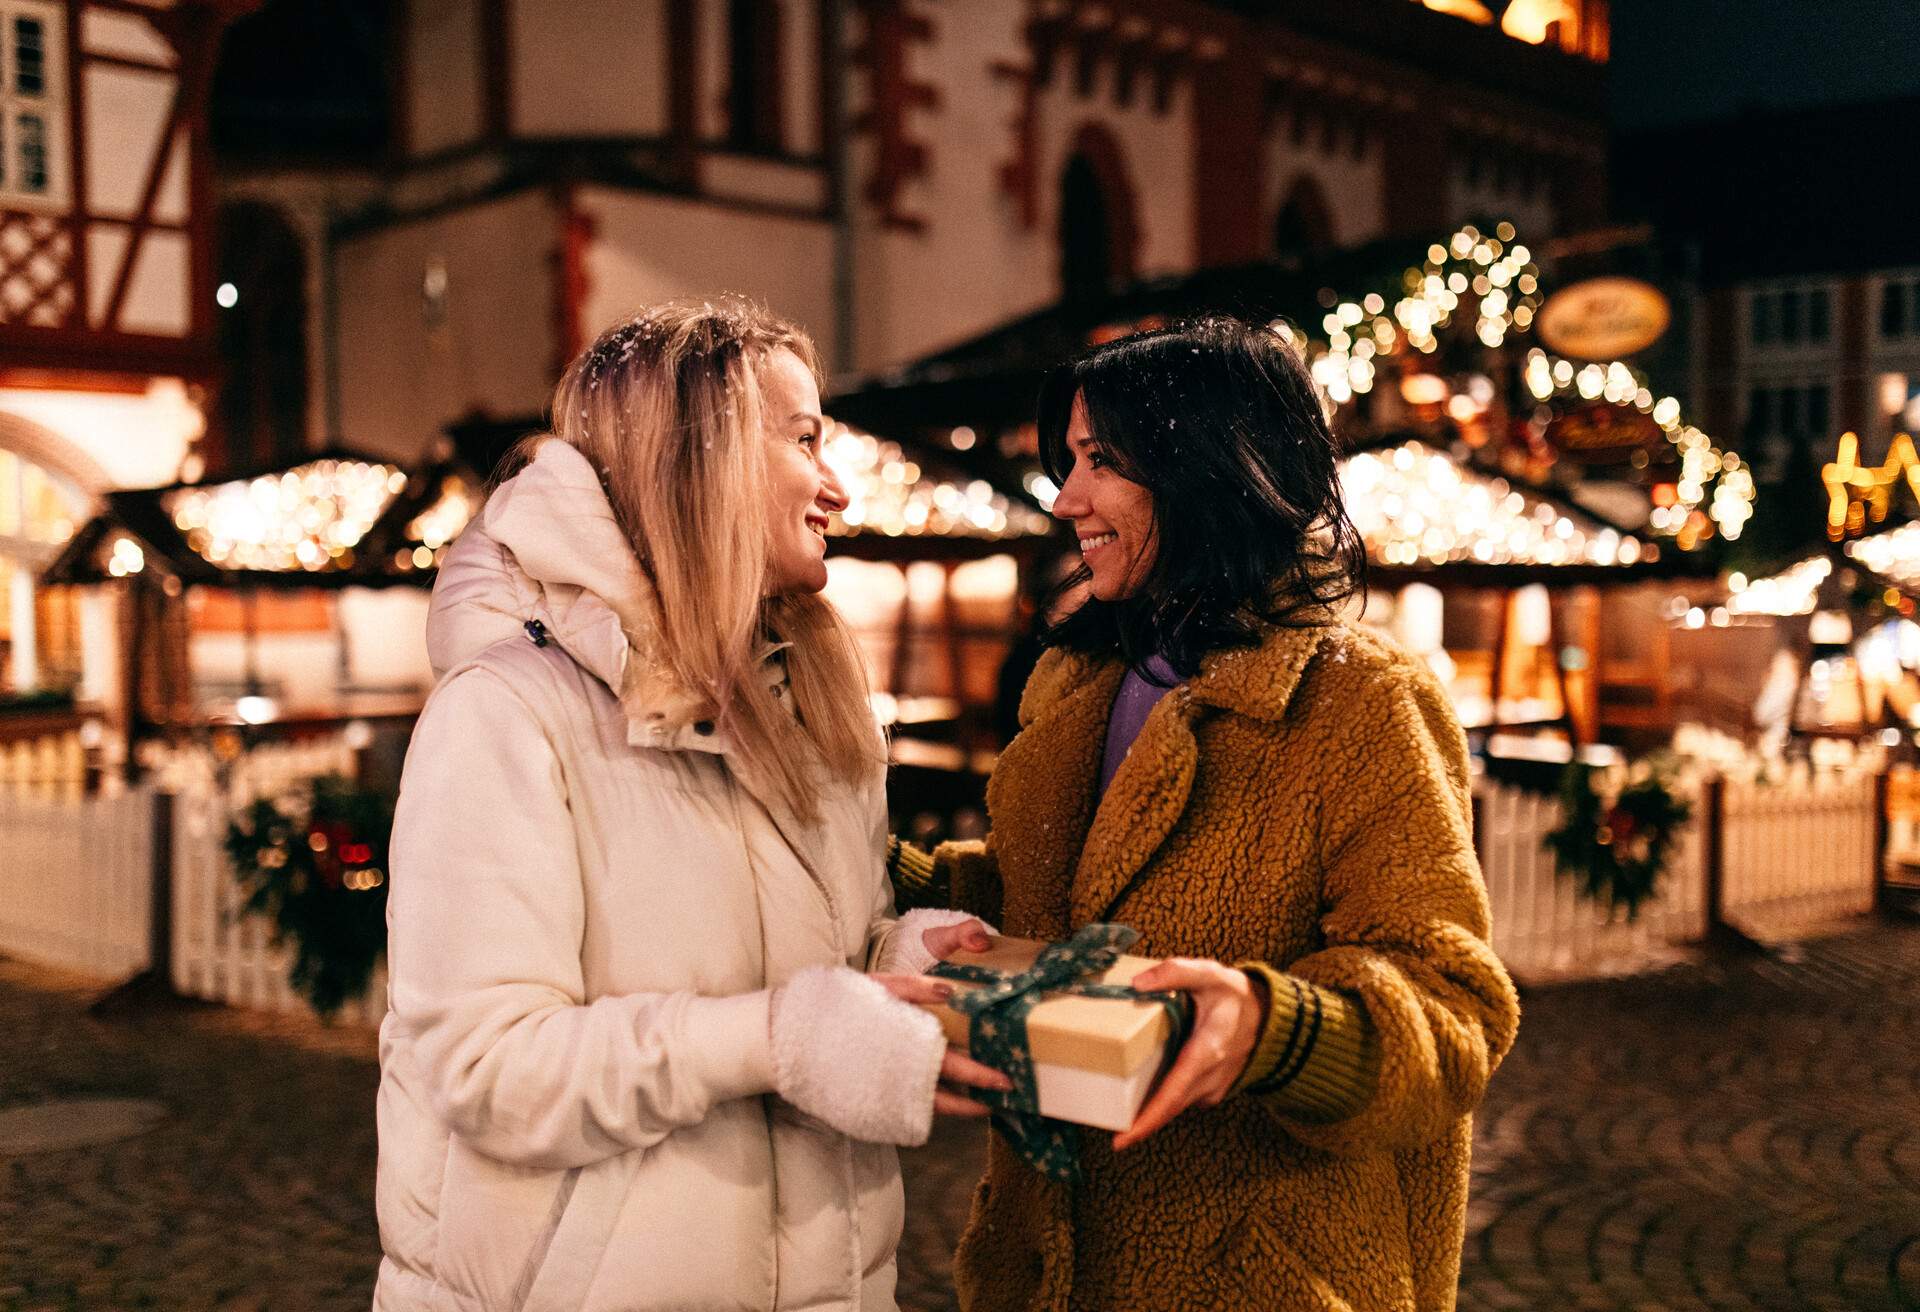 DEST_GERMANY_CHRISTMAS_MARKET_PEOPLE_WOMEN_GIFT_GettyImages-1354826765